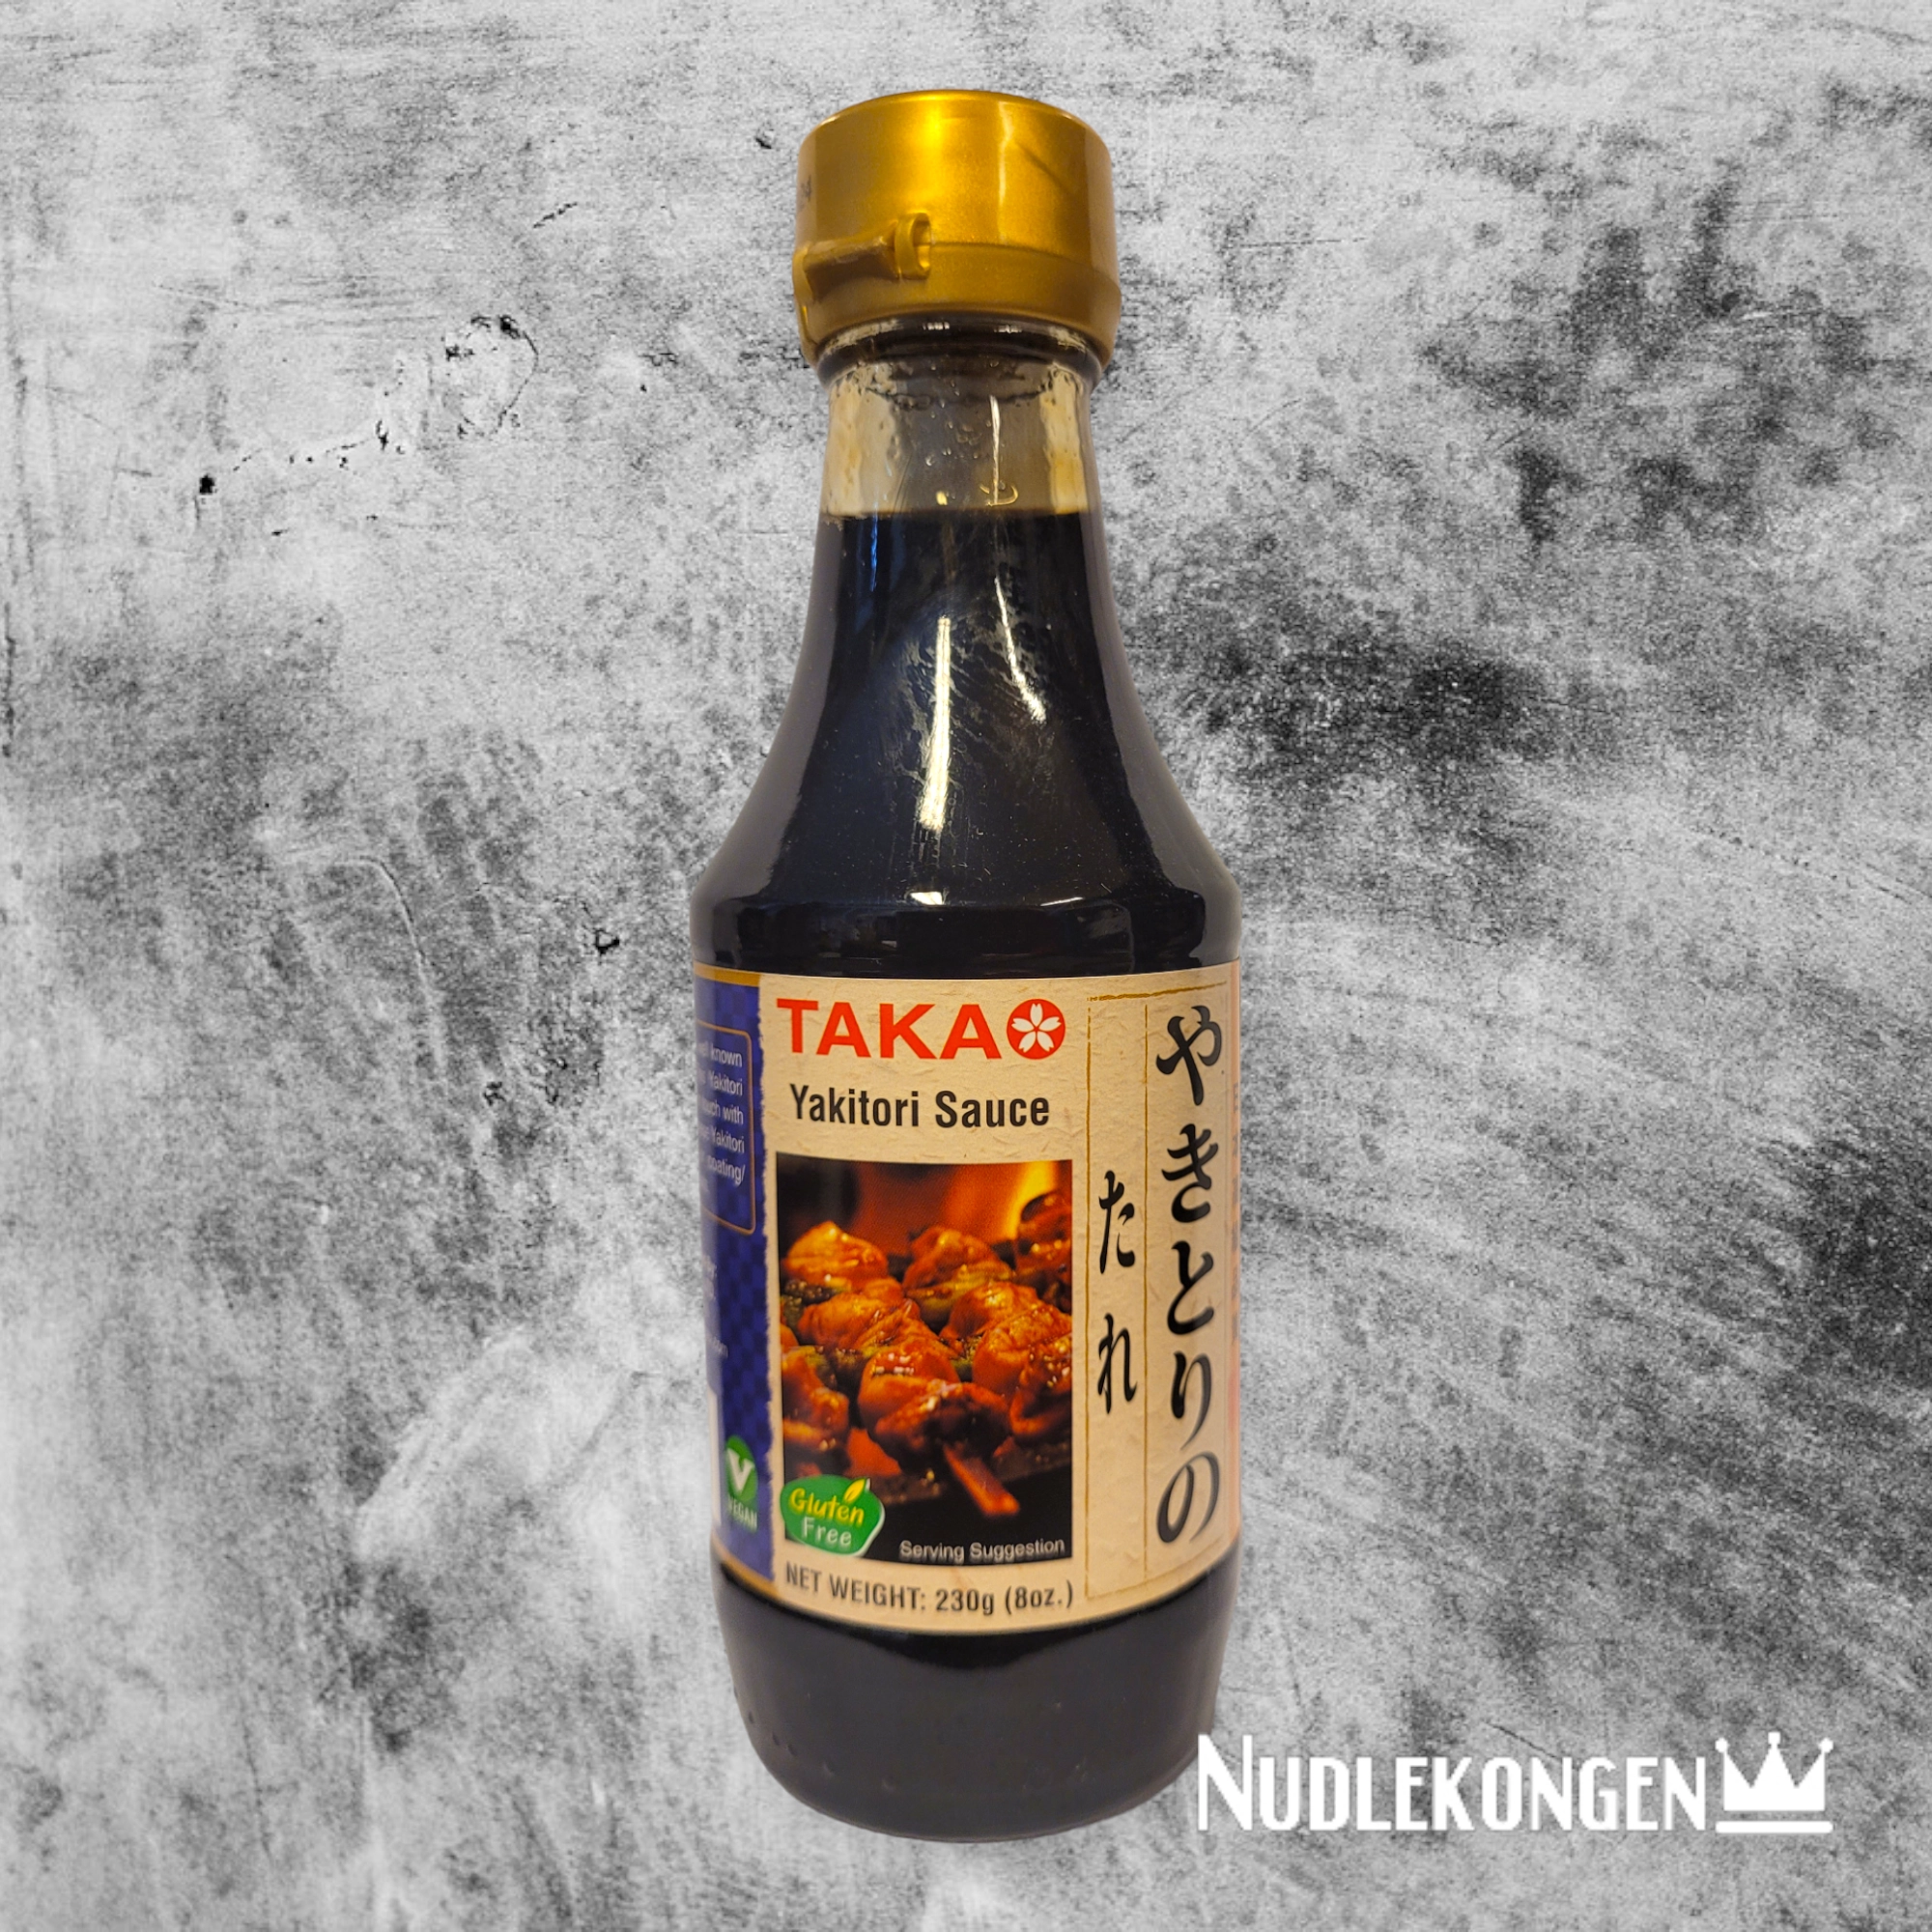 YAKITORI SAUCE - SAUCE FOR GRILLED CHICKEN